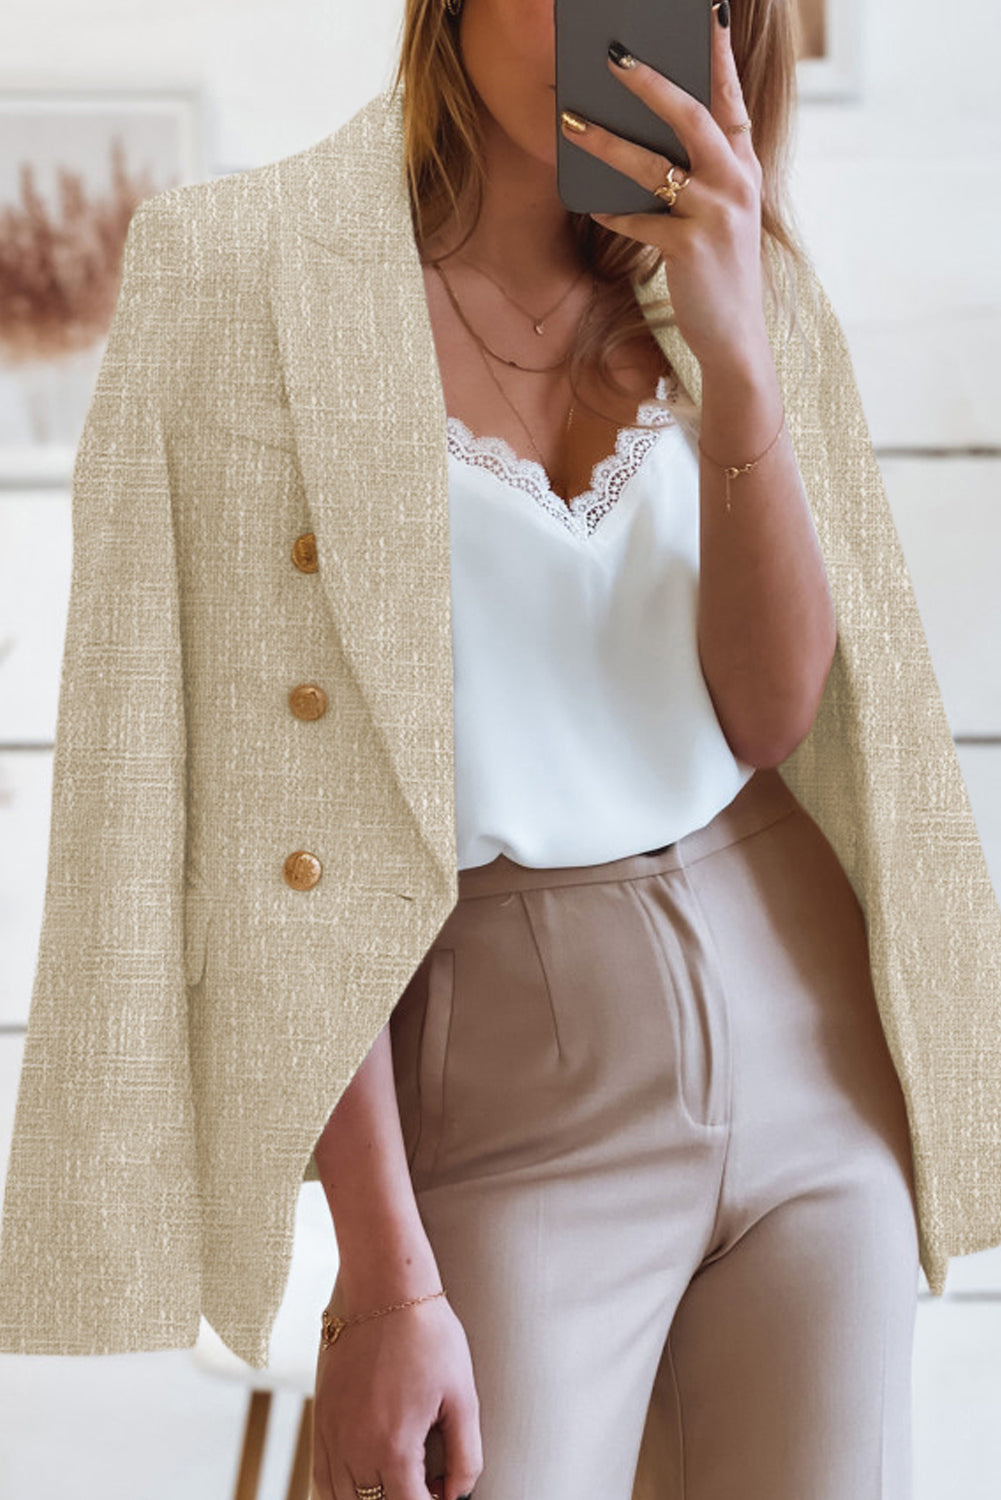 LC852370-16-S, LC852370-16-M, LC852370-16-L, LC852370-16-XL, LC852370-16-2XL, Khaki Double Breasted Lapel Blazers Women's Casual Office Long Sleeve Jacket